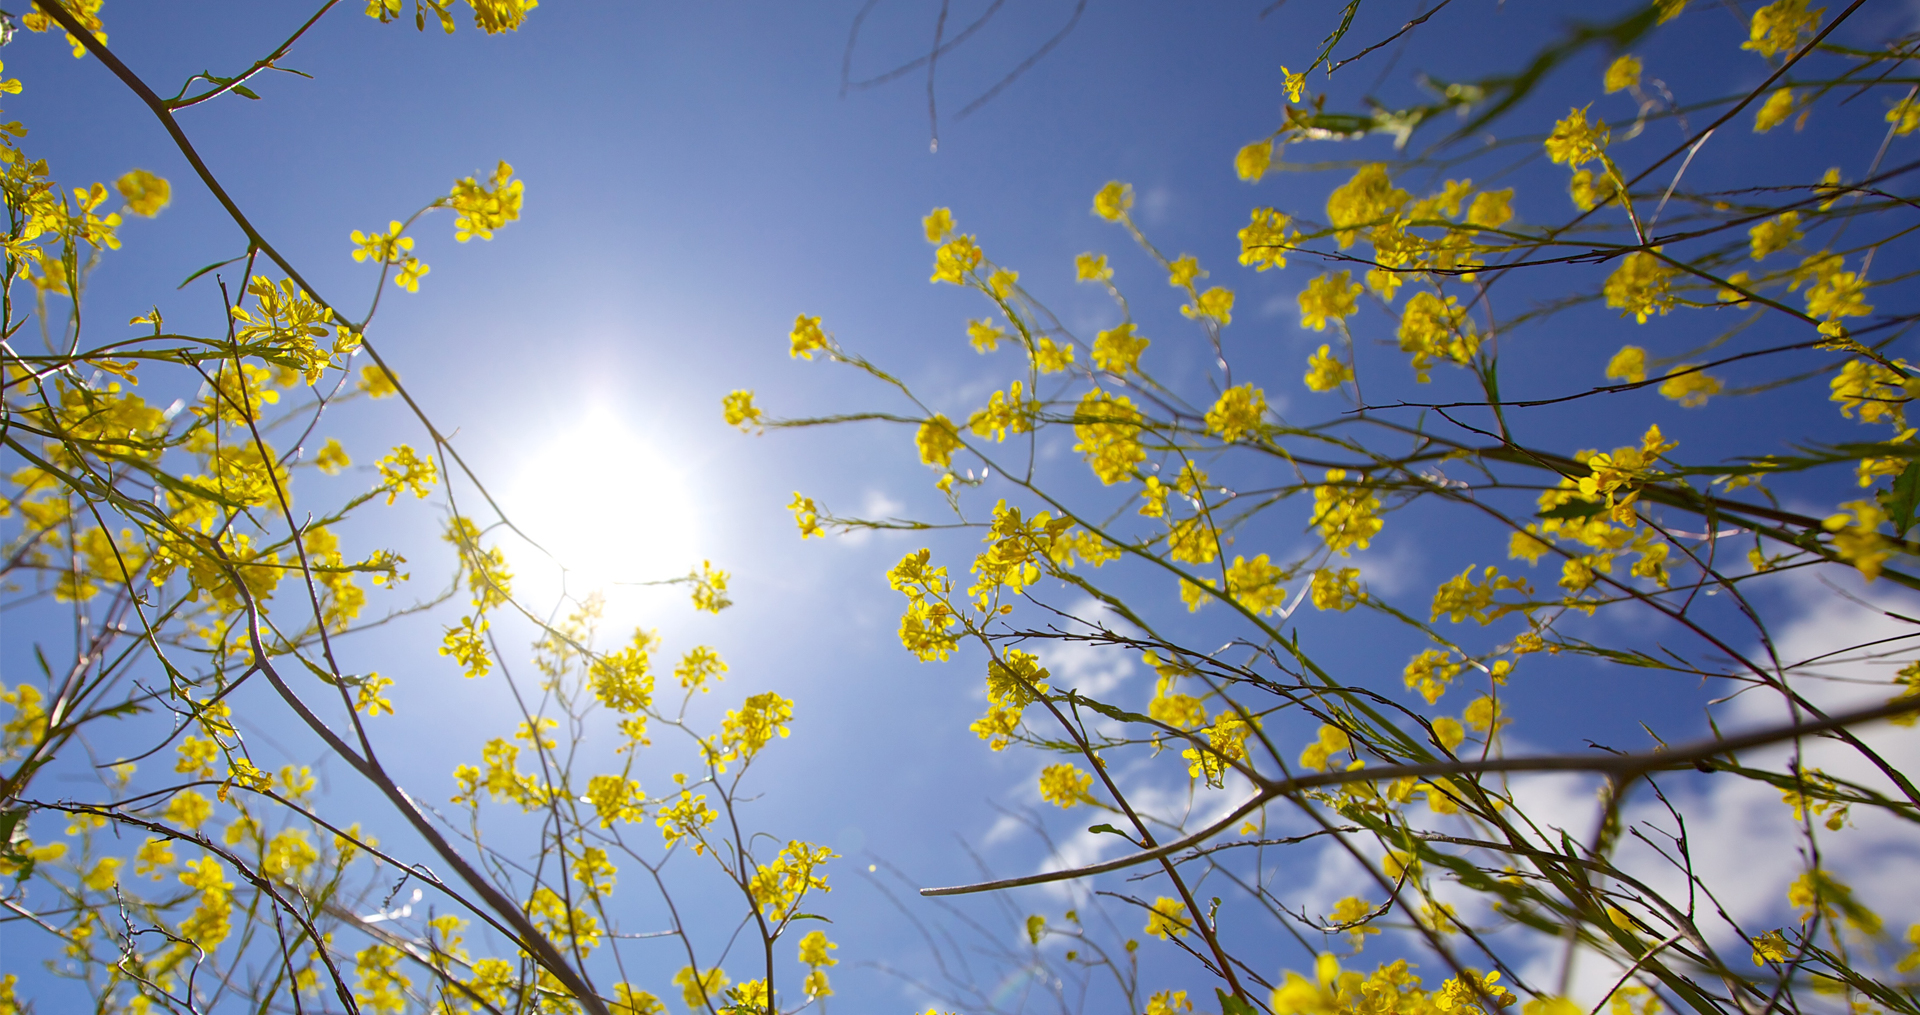 sun shine through some trees with yellow flowers